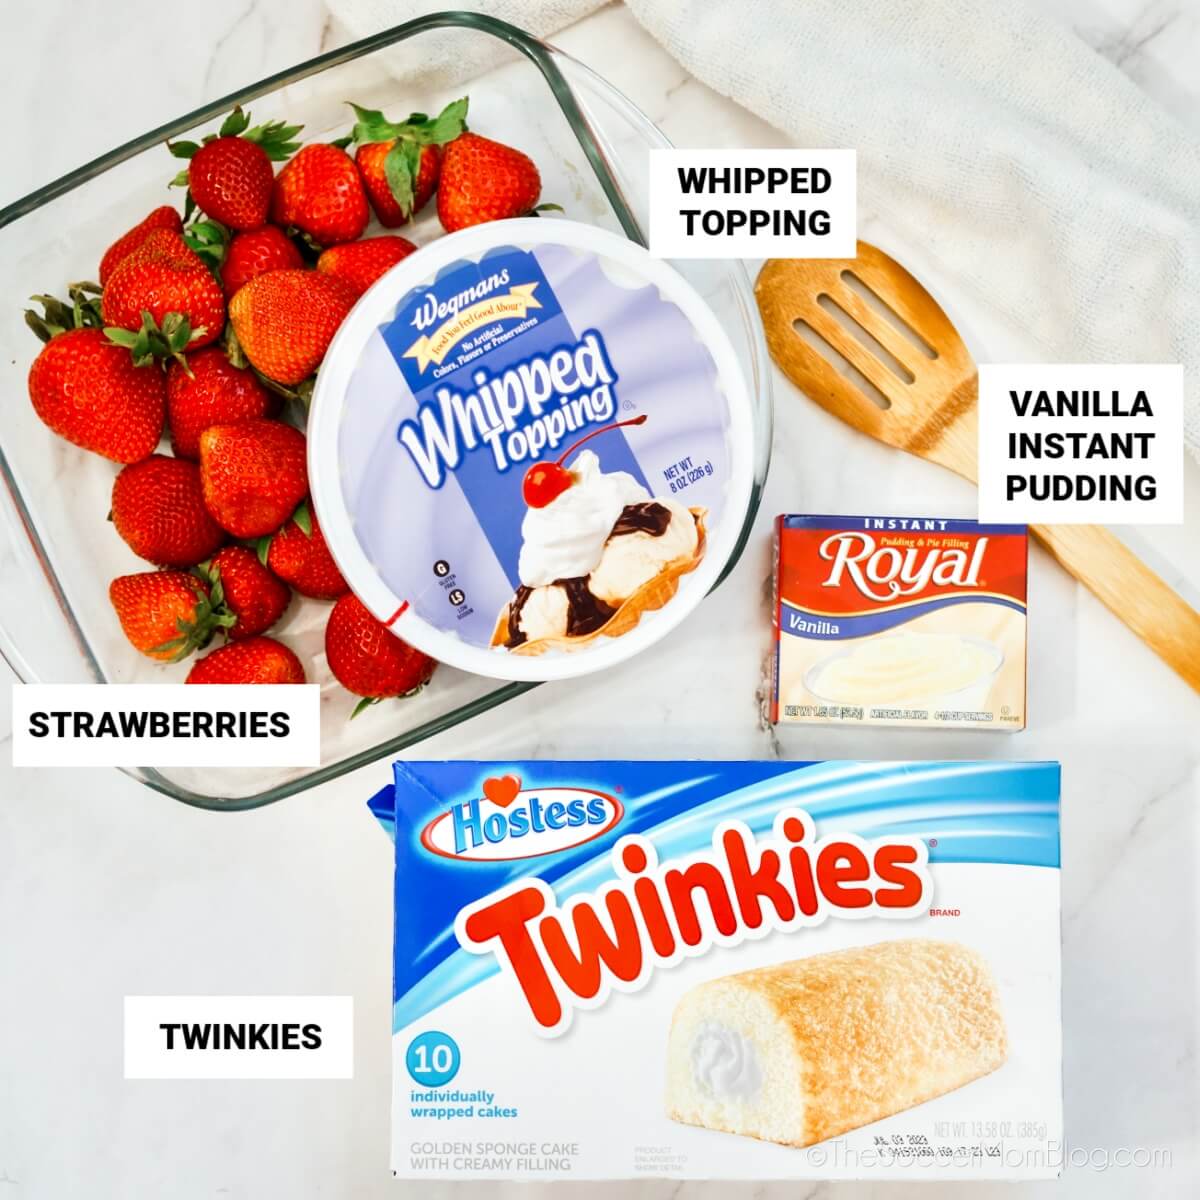 Strawberry Twinkie Cake ingredients: whipped topping, strawberries, vanilla instant pudding, Twinkies